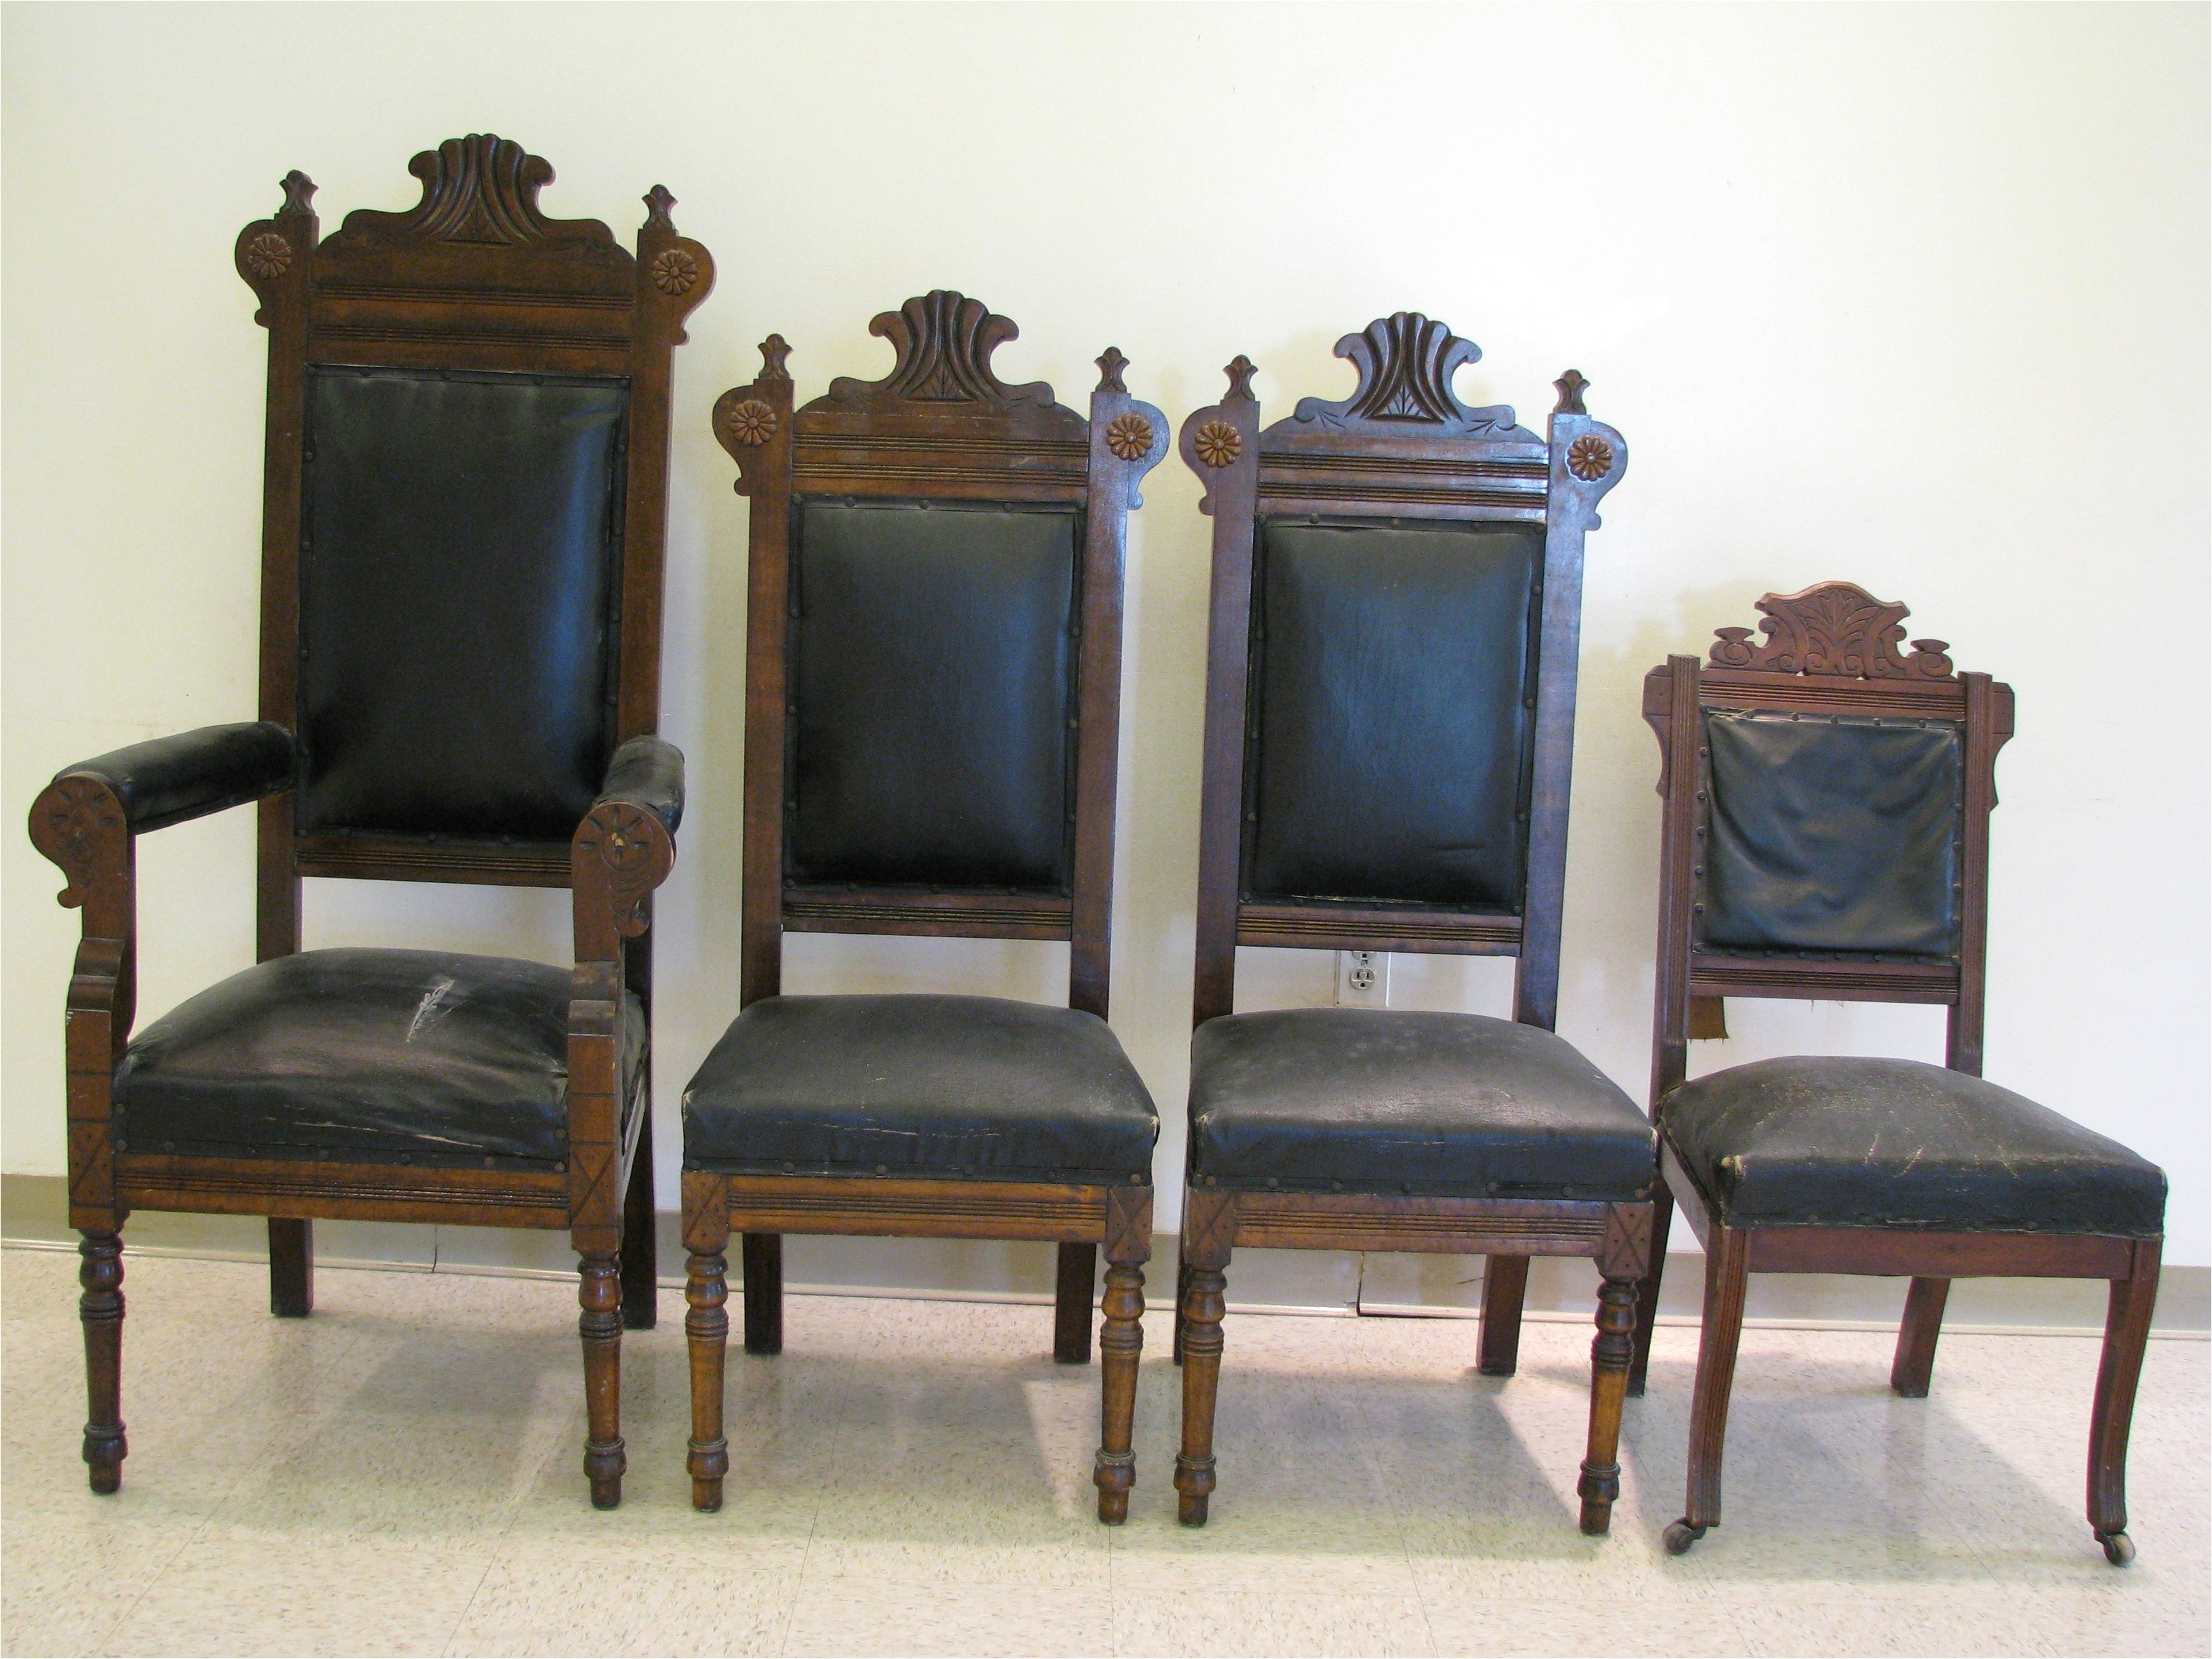 Church Sanctuary Chairs for Sale Lectern Pulpit Chairs Church Pulpit Furniture Communion Table